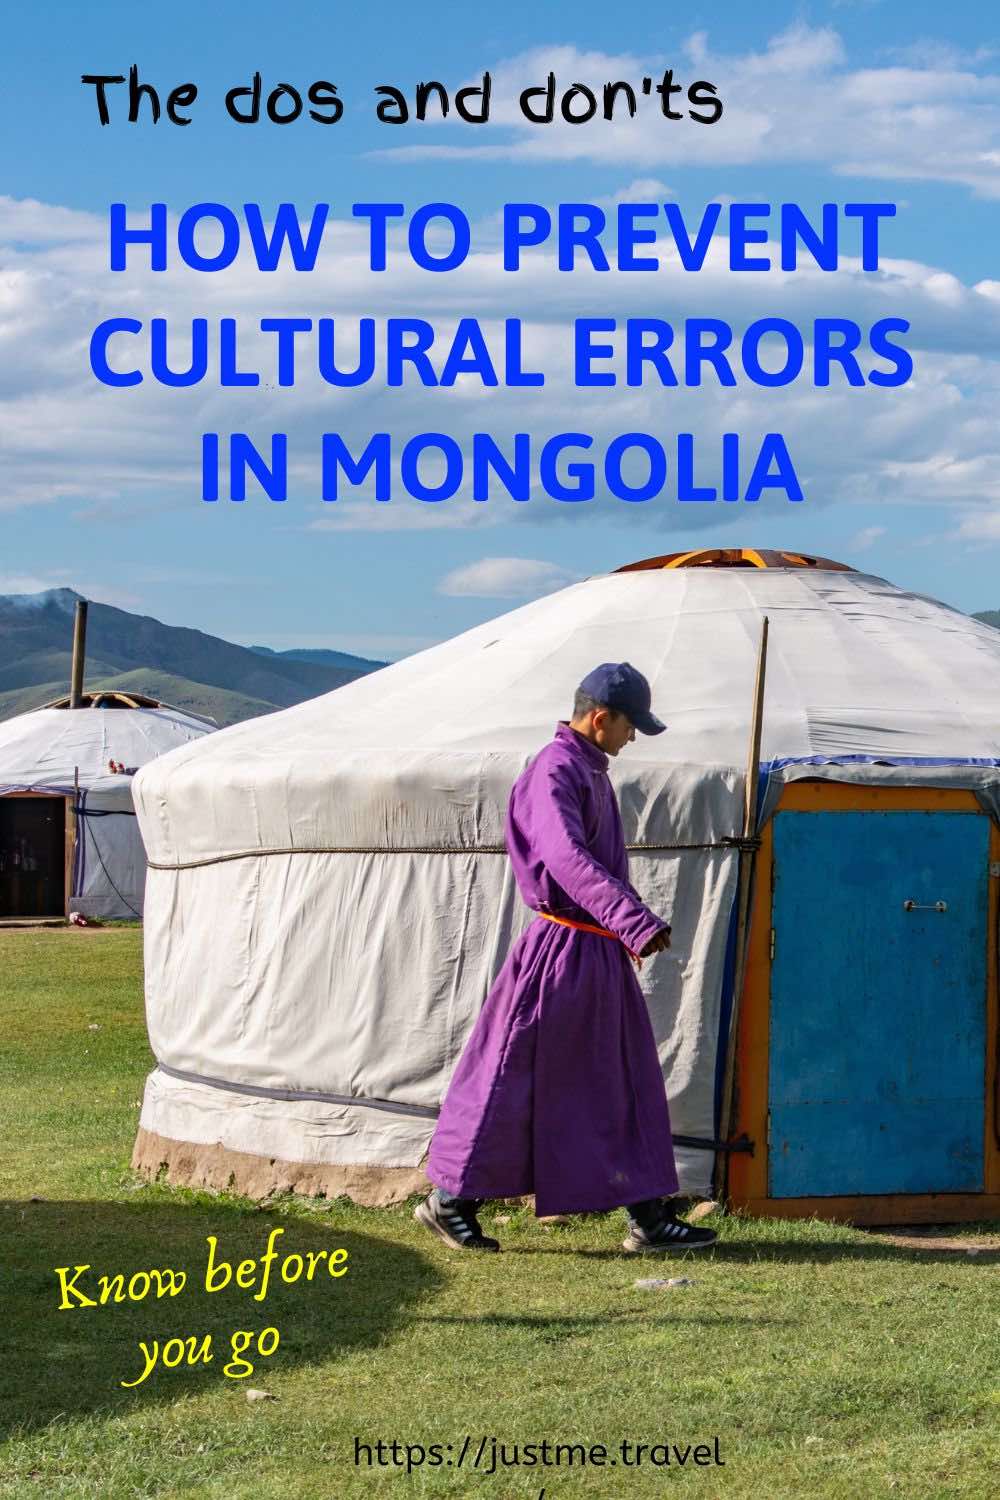 A Mongolian nomadic man in tradition garb walks in front of a ger. There is a second ger behind the first and a mountain in the background.